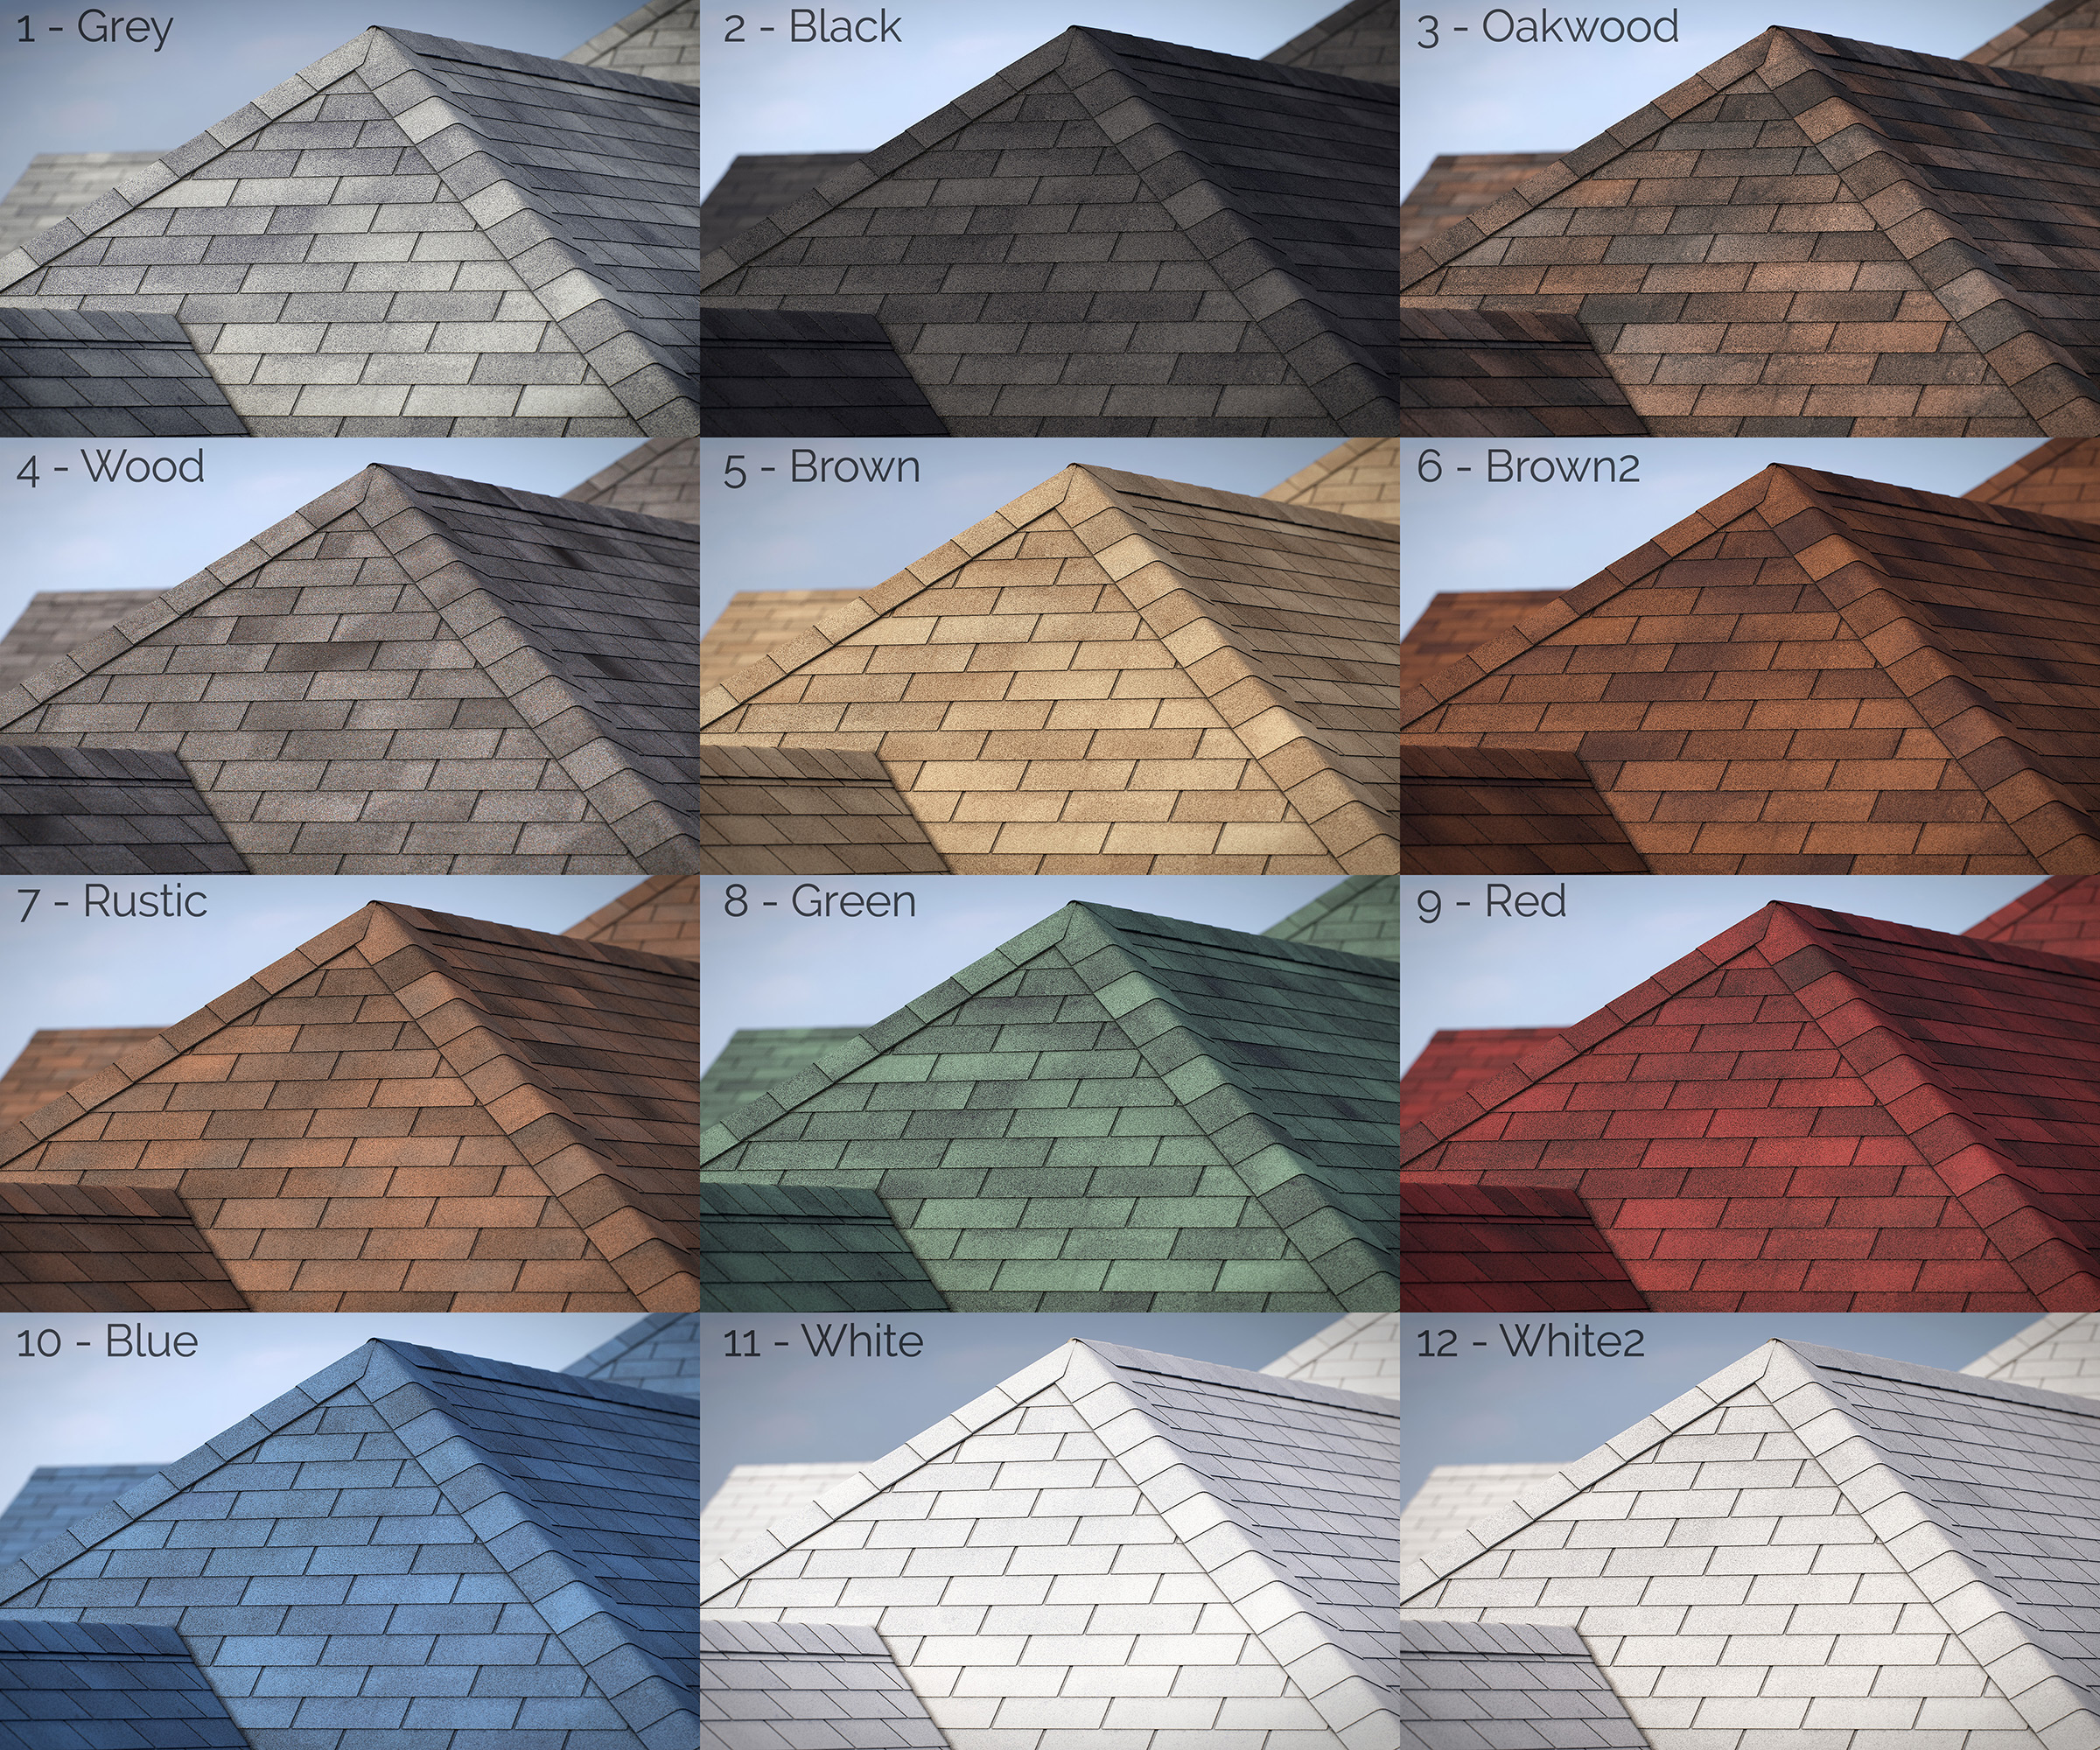 3-tab asphalt roof shingles 3D model preset for 3dsmax and RailClone. Rendered with vray, made for arch-viz.